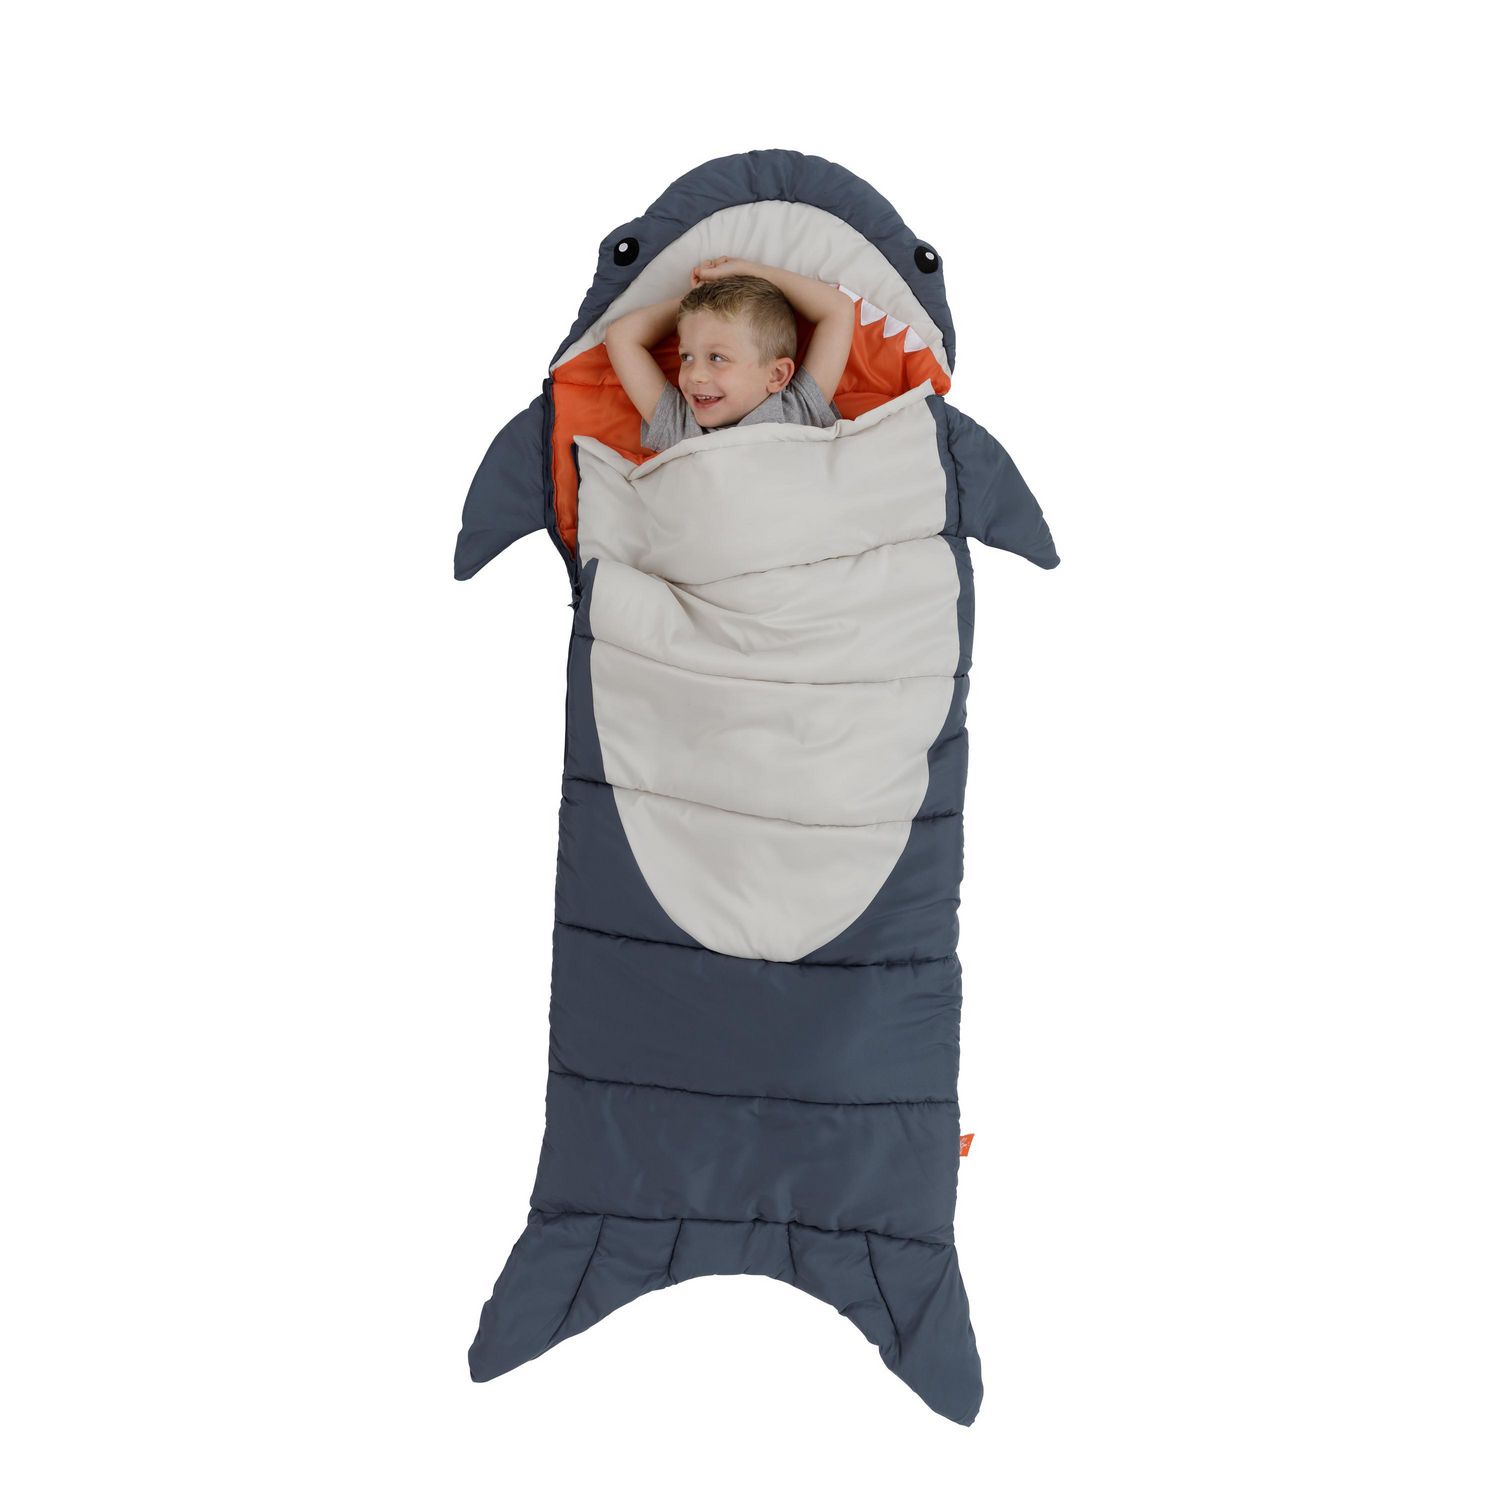 Personalized Sleeping Bags